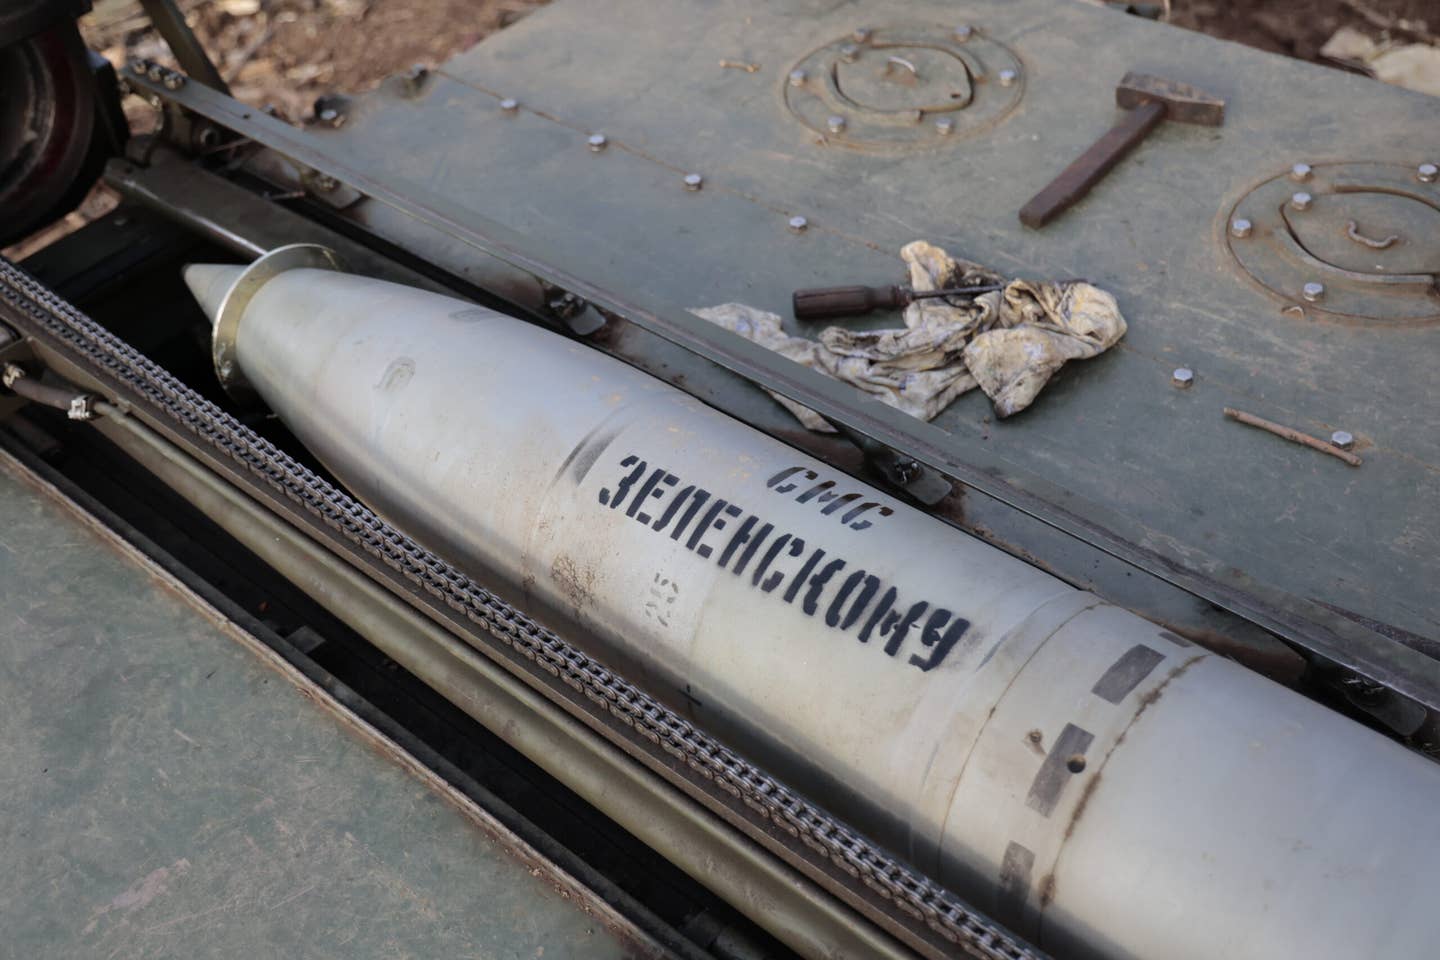 Russian forces are running out of new artillery and rocket munitions and are increasingly using old, degraded, potentially dangerous-to-handle munitions, according to the Pentagon. (Photo by Leon Klein/Anadolu Agency via Getty Images)